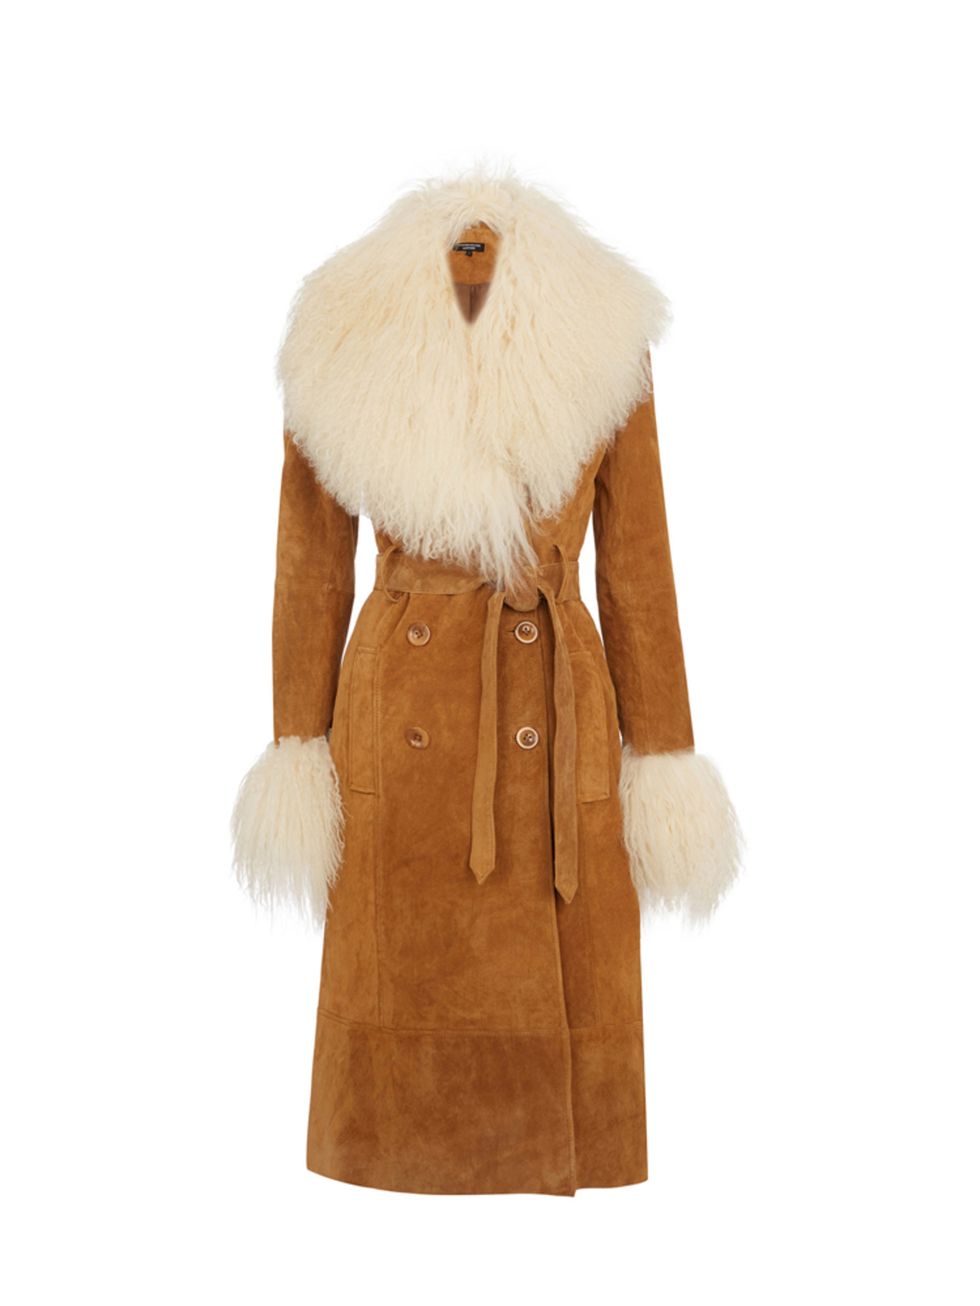 <p><a href="http://www.warehouse.co.uk/shearling-&-suede-belted-coat/coats-&-jackets/warehouse/fcp-product/02447011" style="line-height: 20.7999992370605px;" target="_blank">Warehouse</a> coat, £350</p>